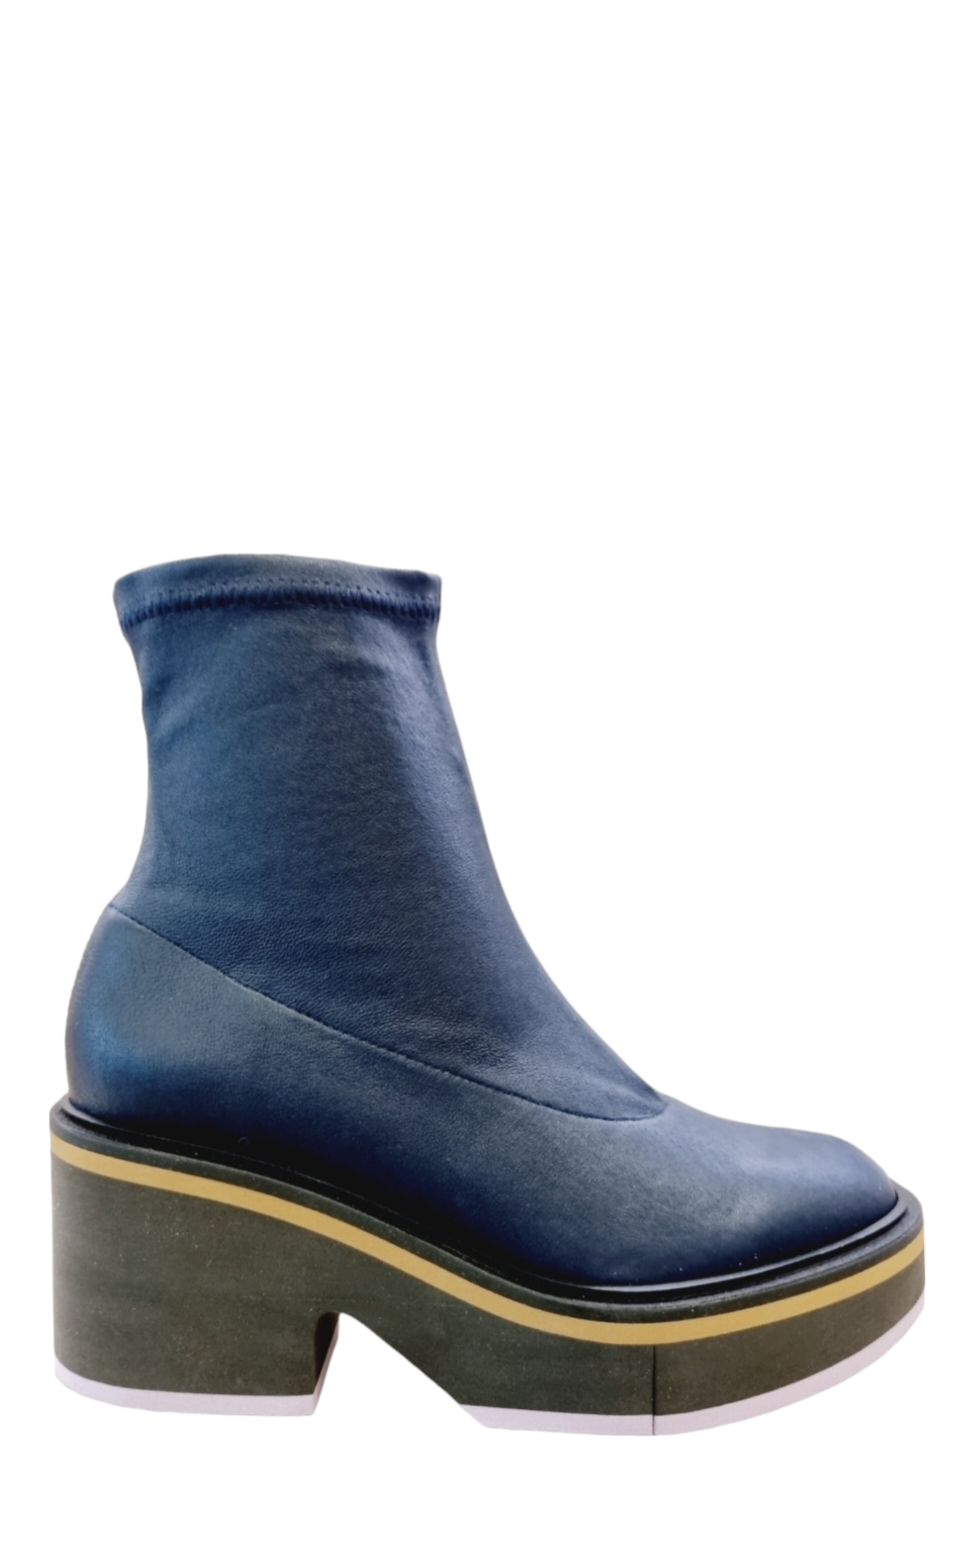 Albane Navy Leather Boots - Clergerie - Liberty Shoes Australia